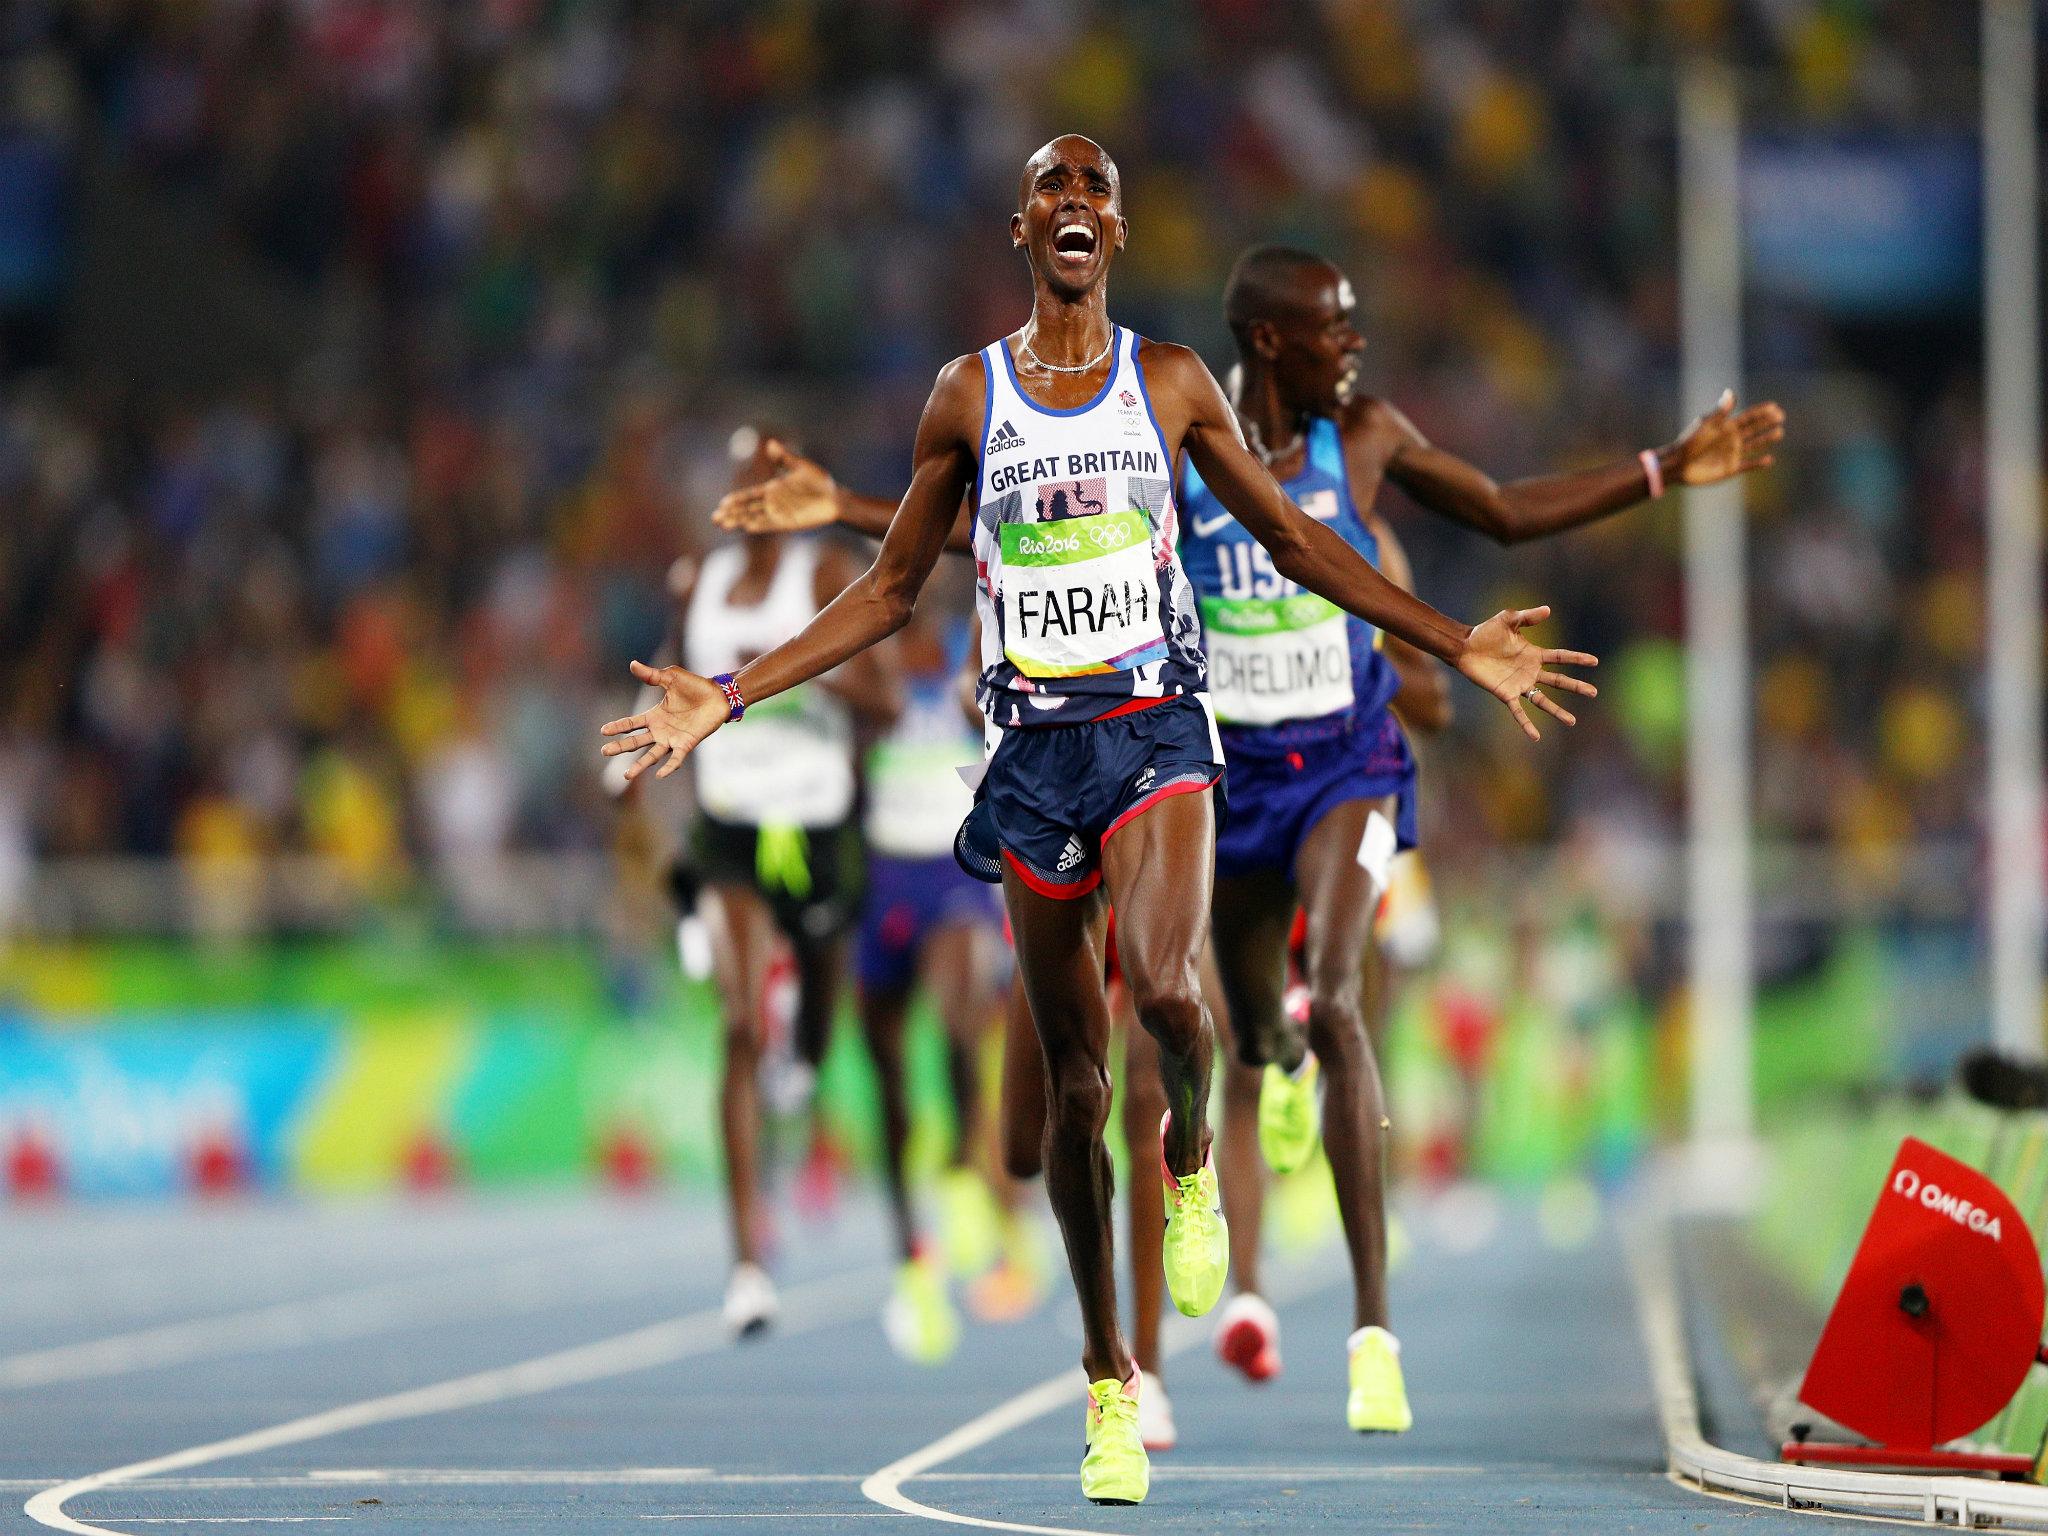 Mo Farah takes gold in the 5,000m final at the 2016 Rio Olympic Games